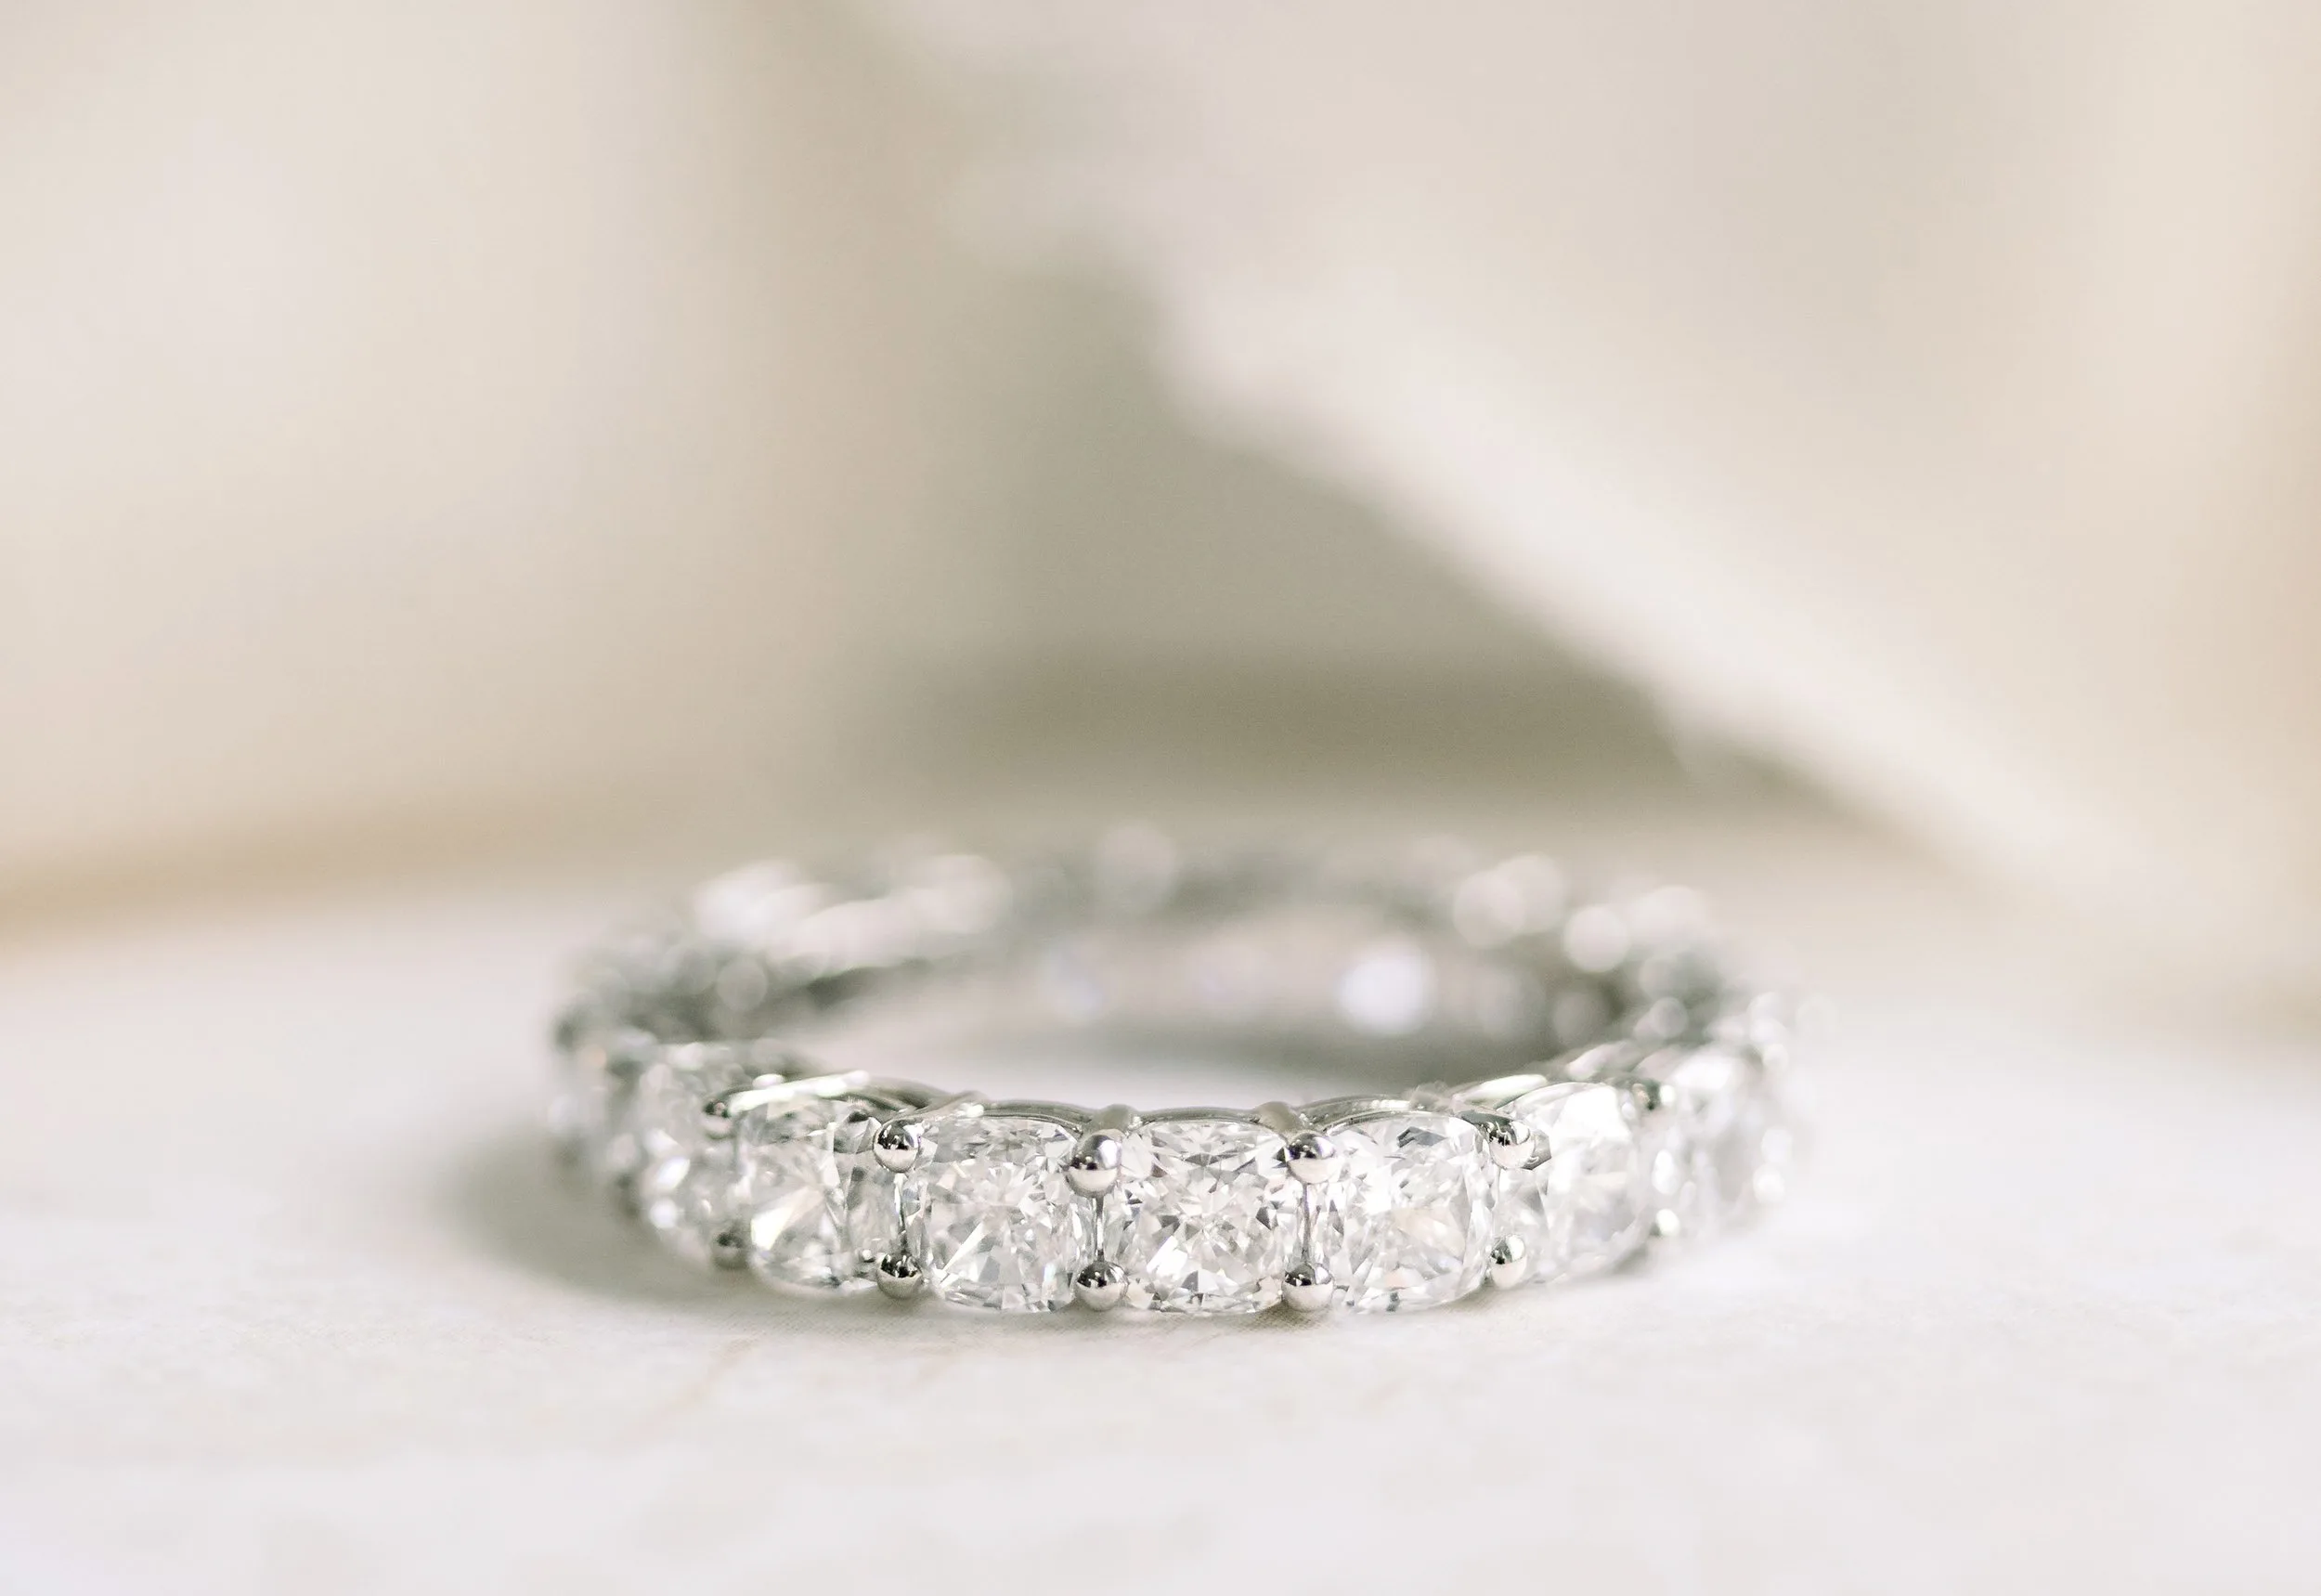 5 Reasons Not to Buy an Eternity Ring | Frank Darling